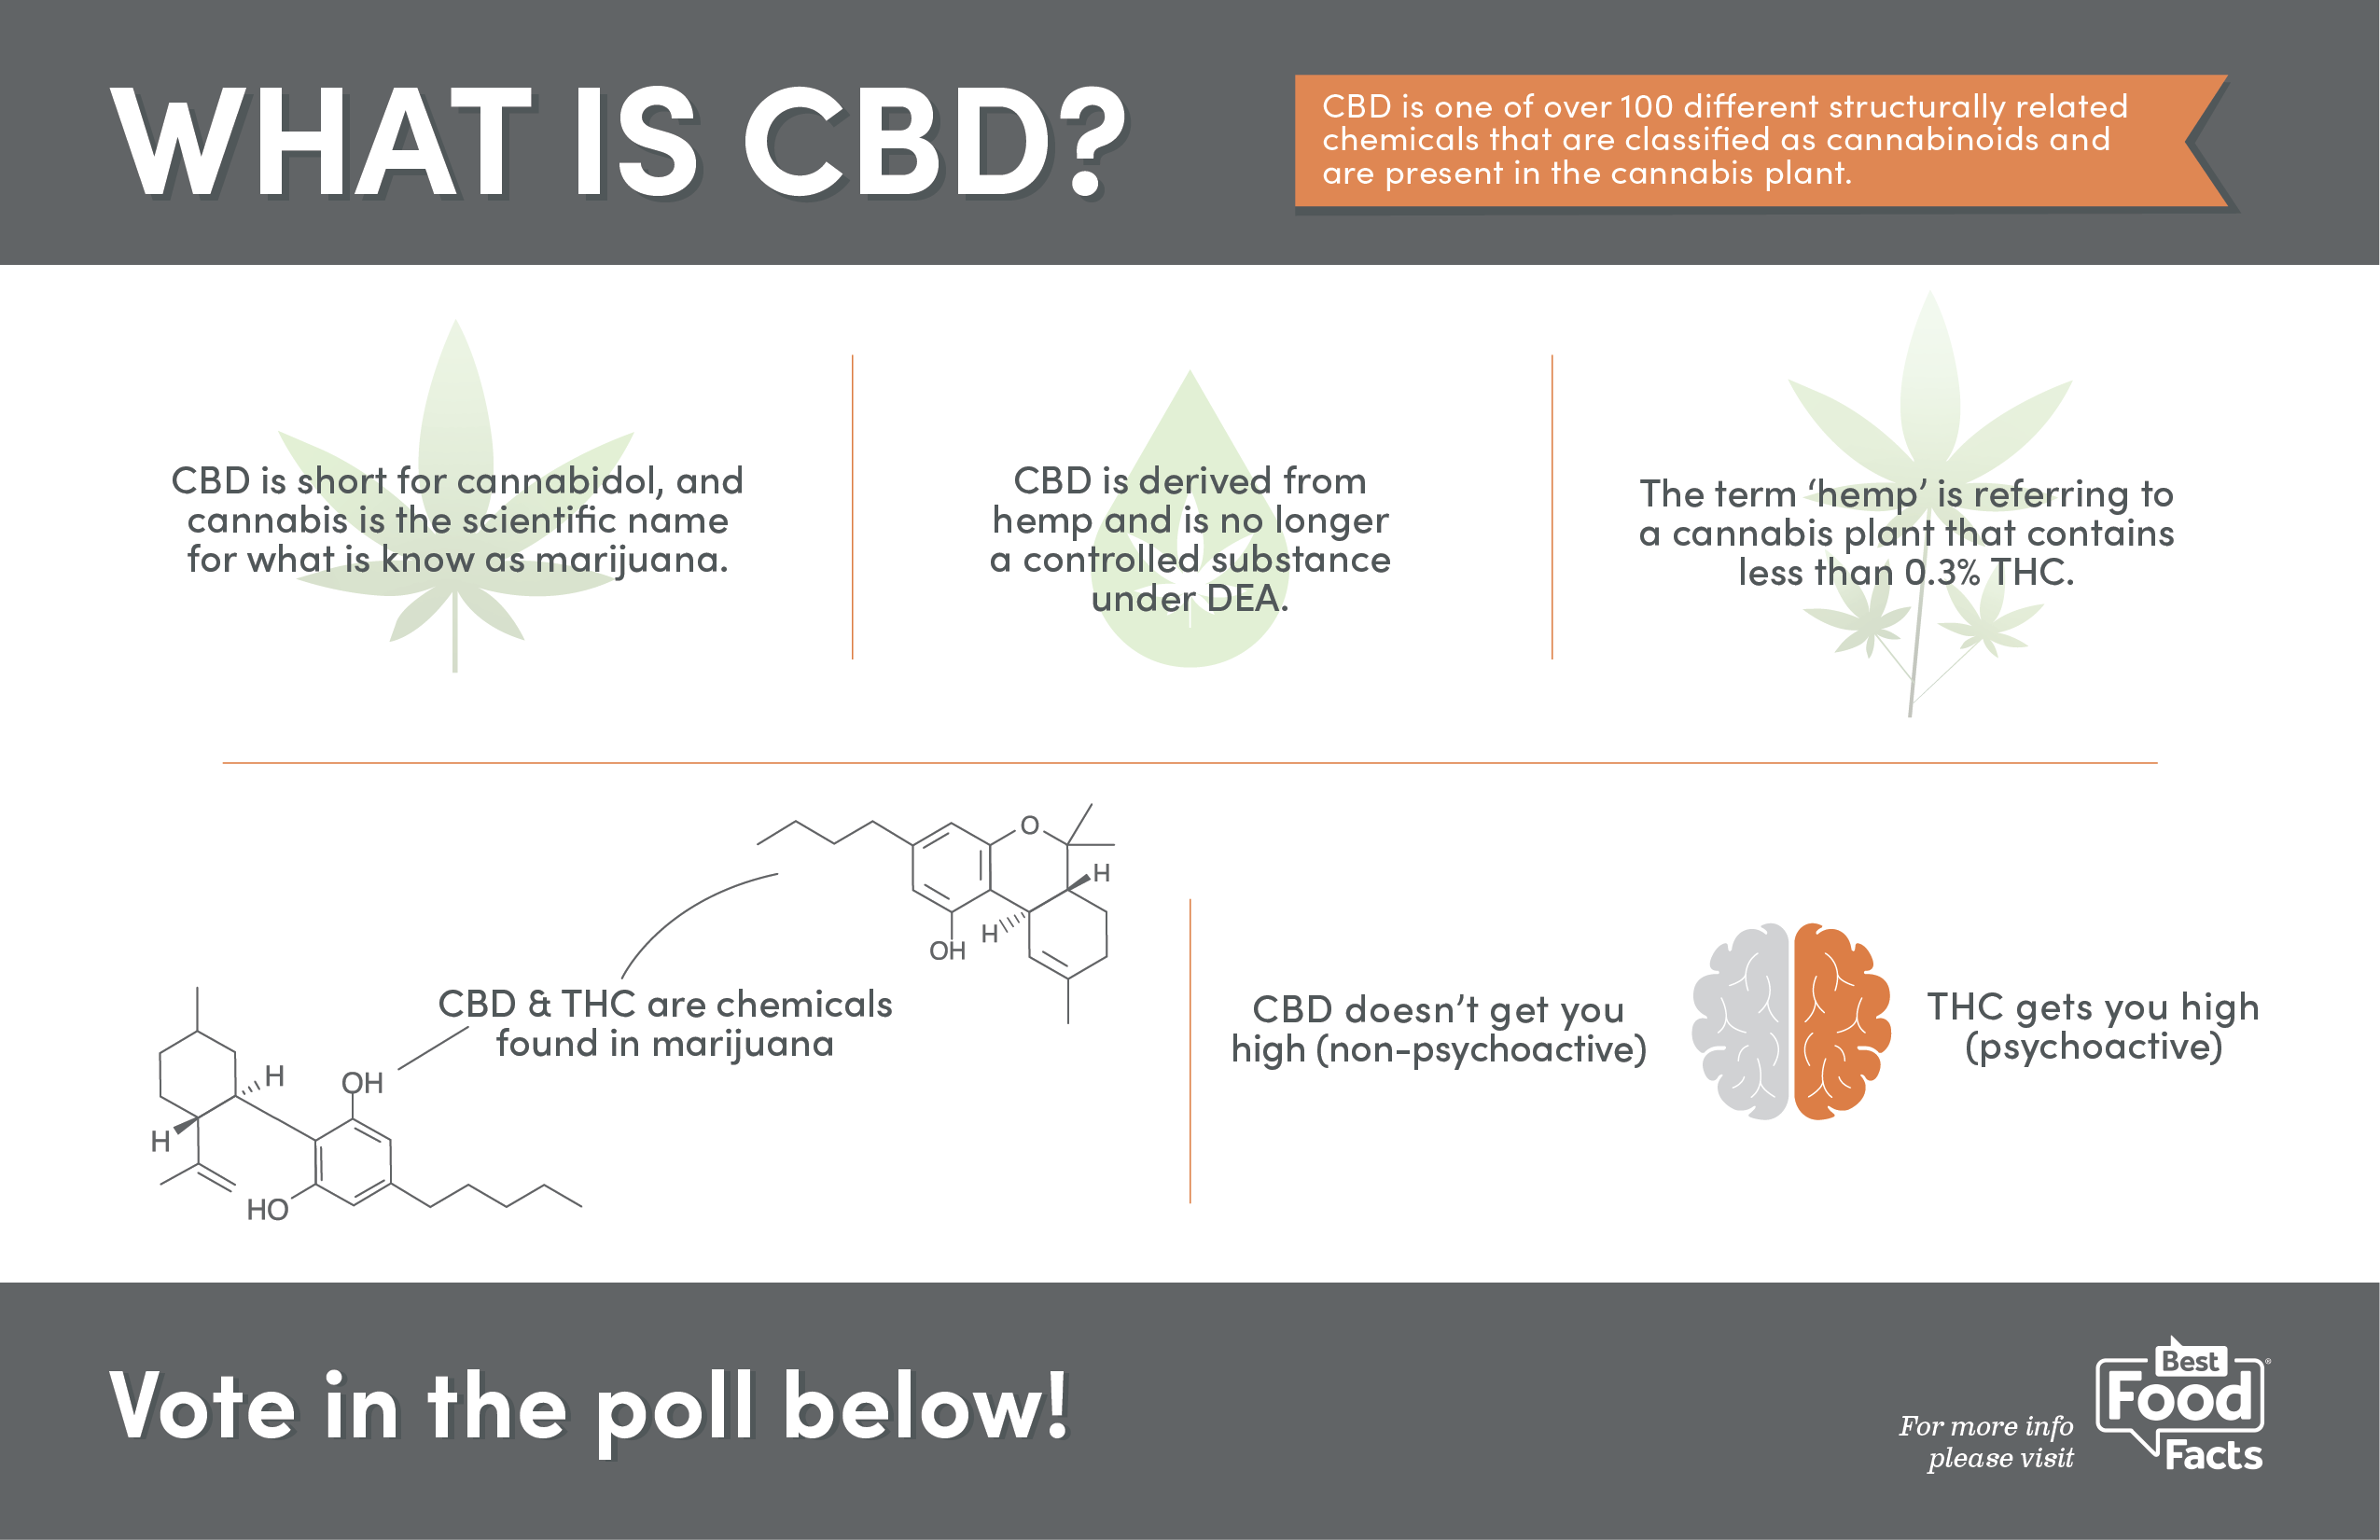 What is CBD? - BestFoodFacts.org